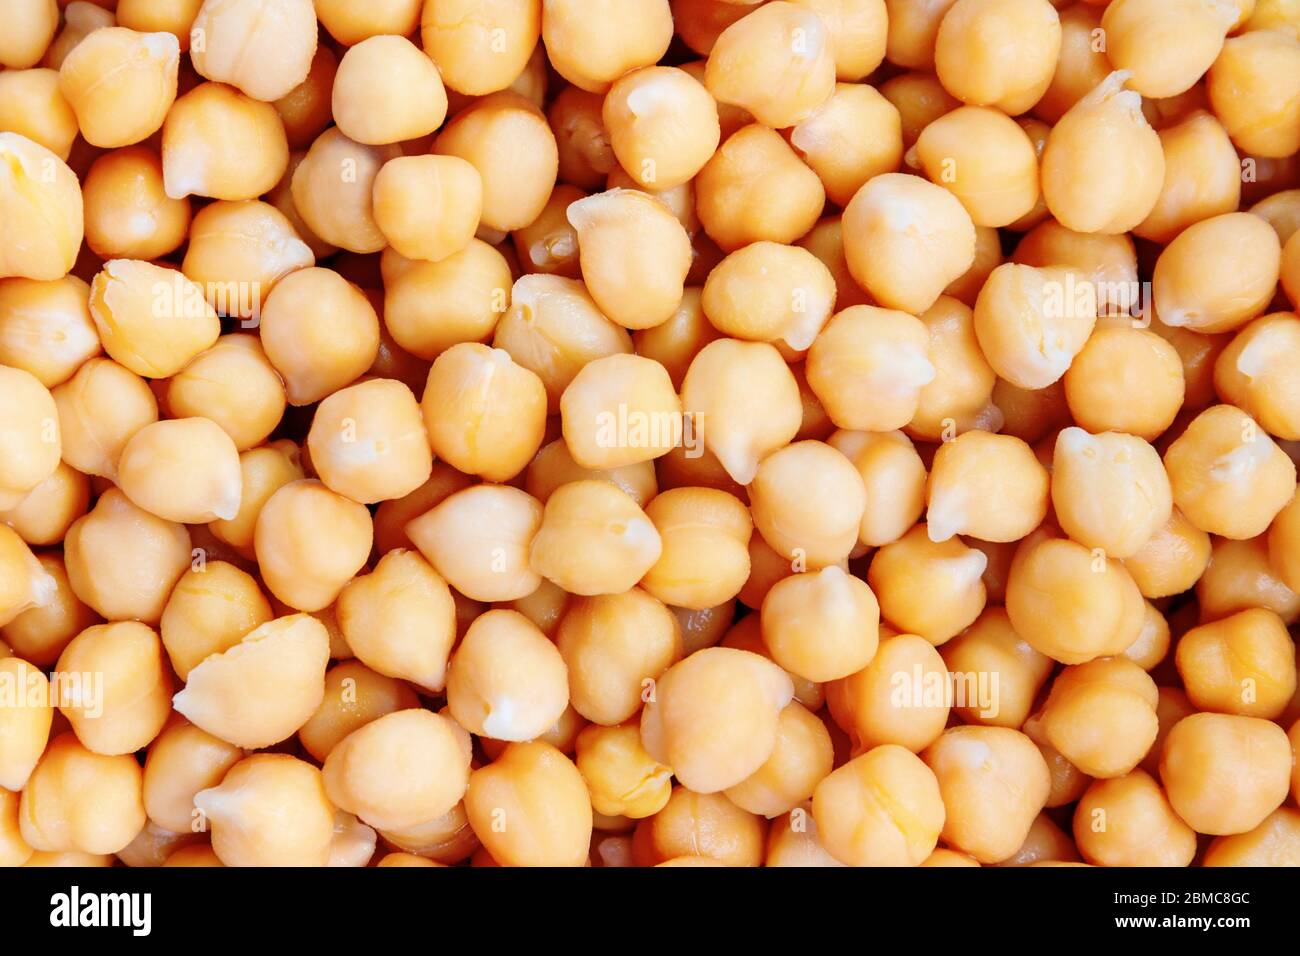 Soaked chickpeas. Chickpeas are hign in proteins and a common ingredient hummus, chana masala and falafel. Stock Photo